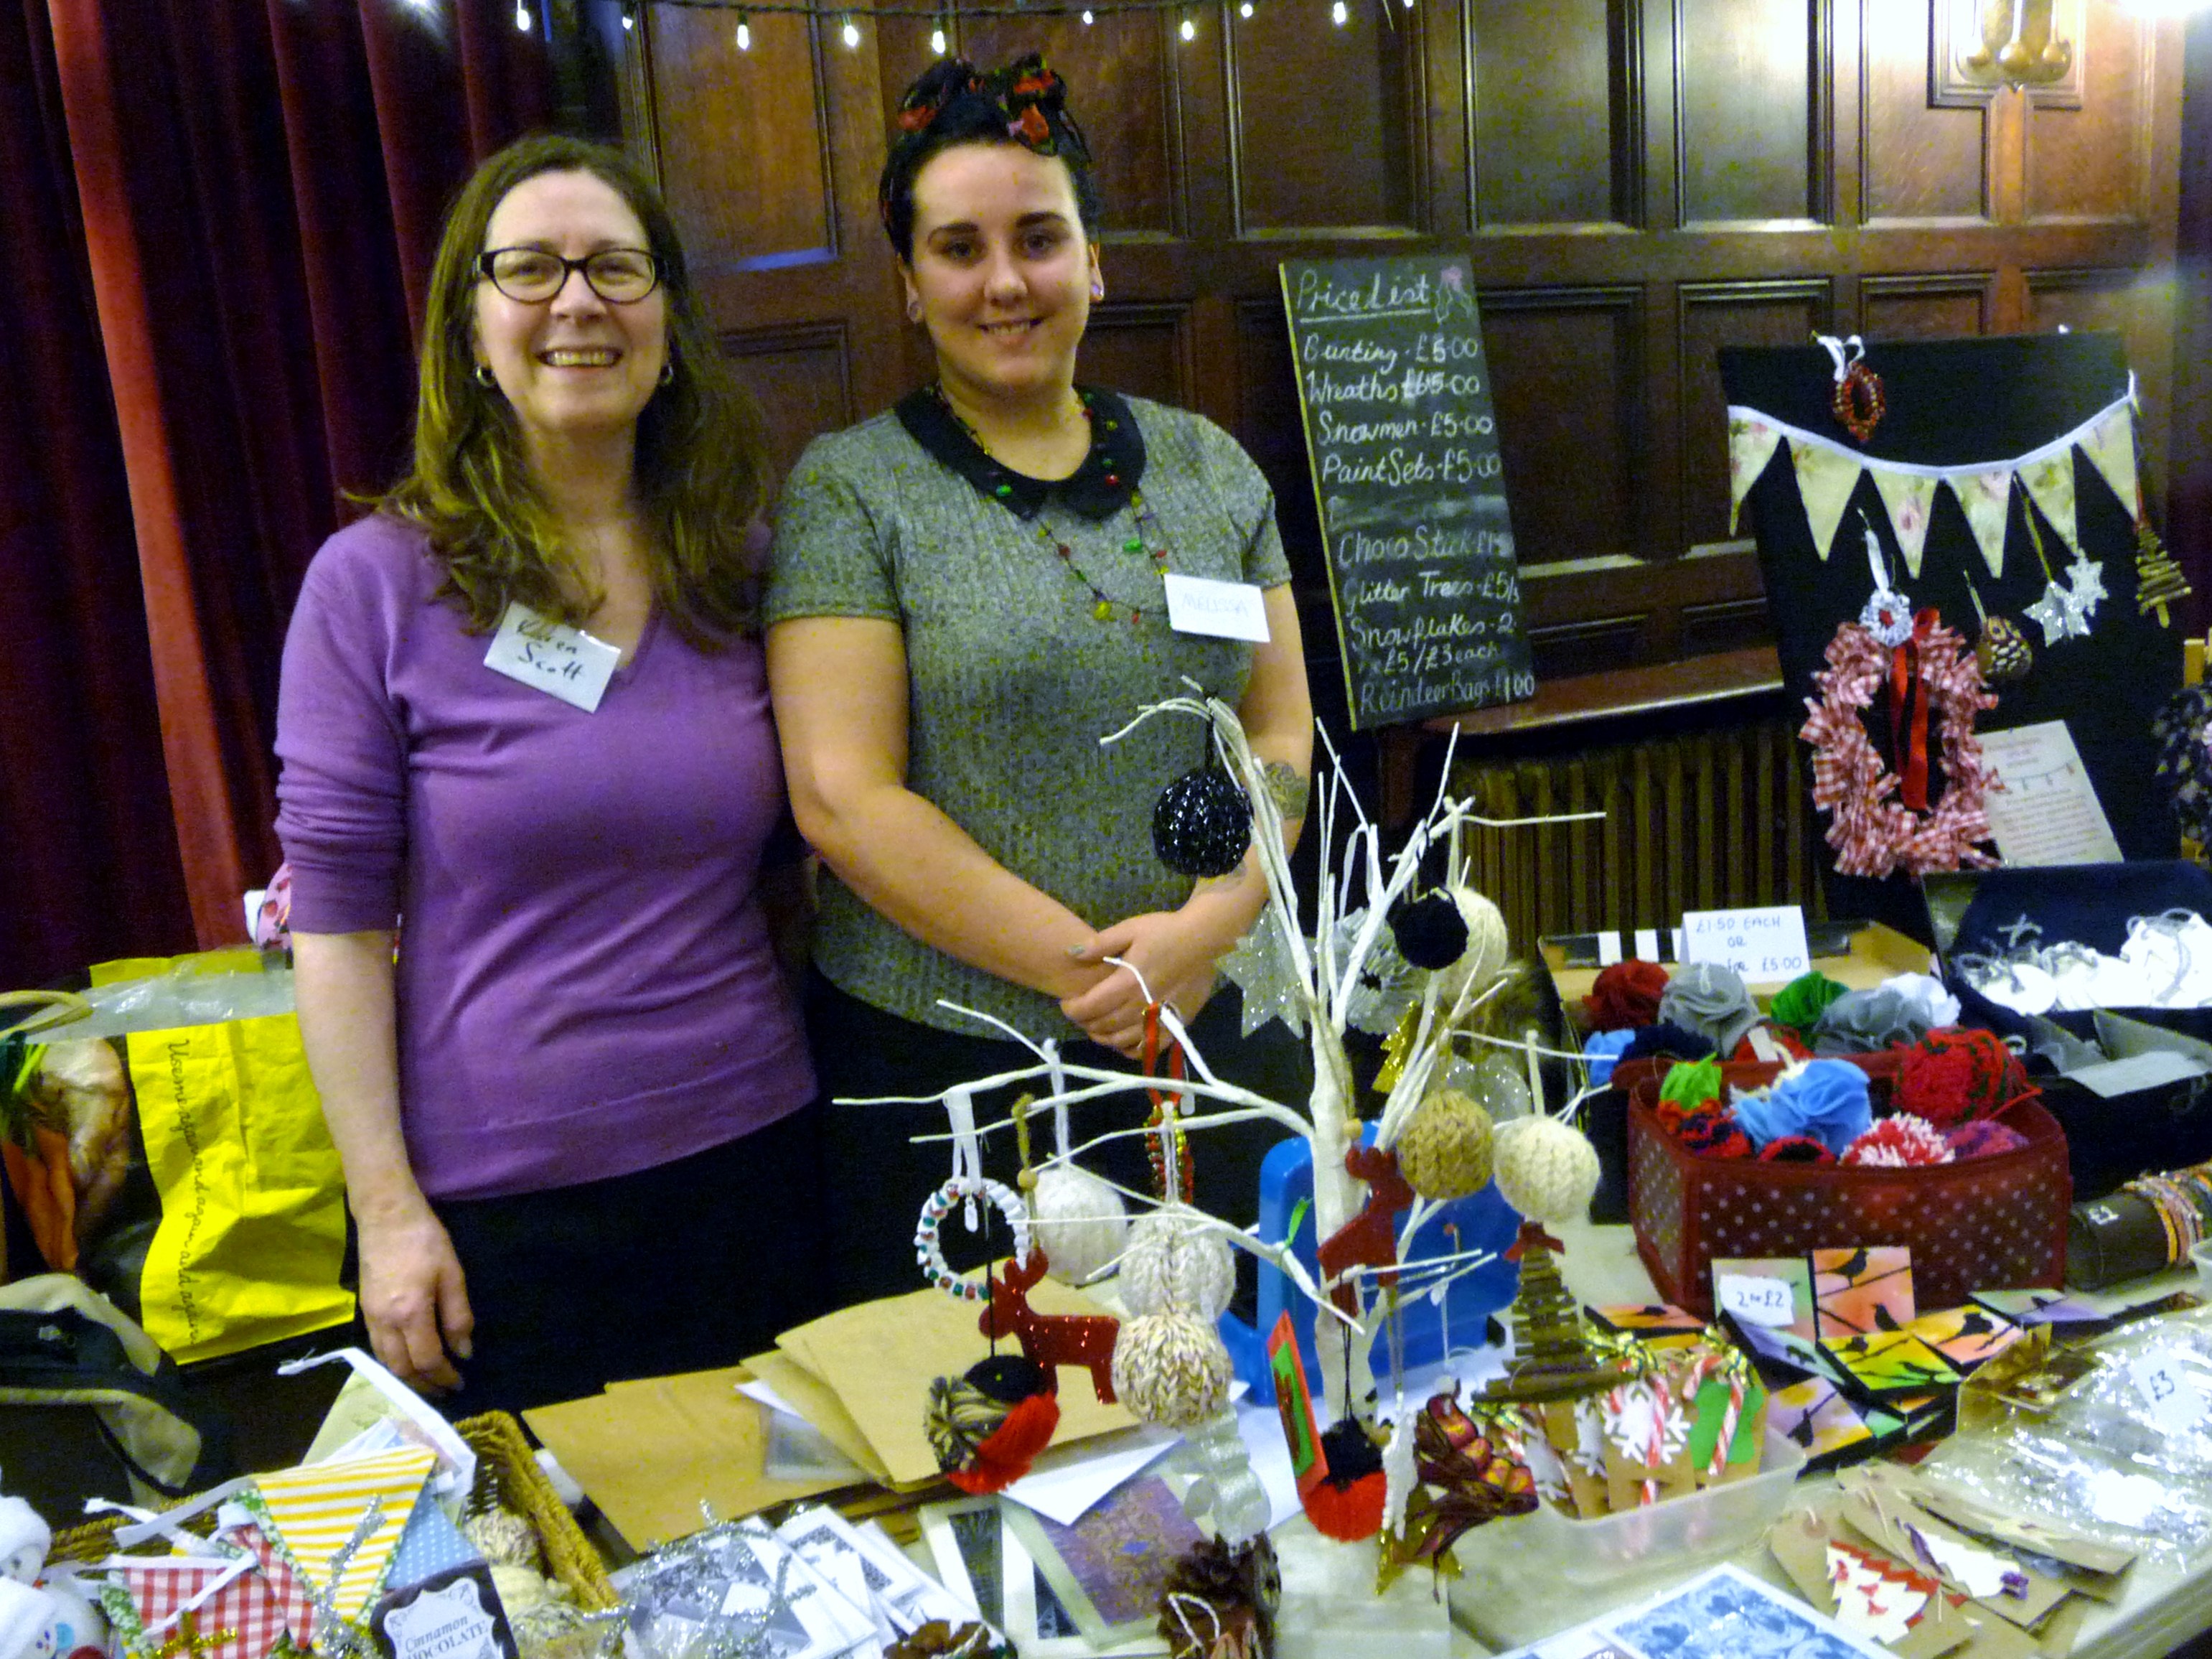 MEG Christmas Party 2015- Karen Scott and Melissa Courtney with their Hope University stall